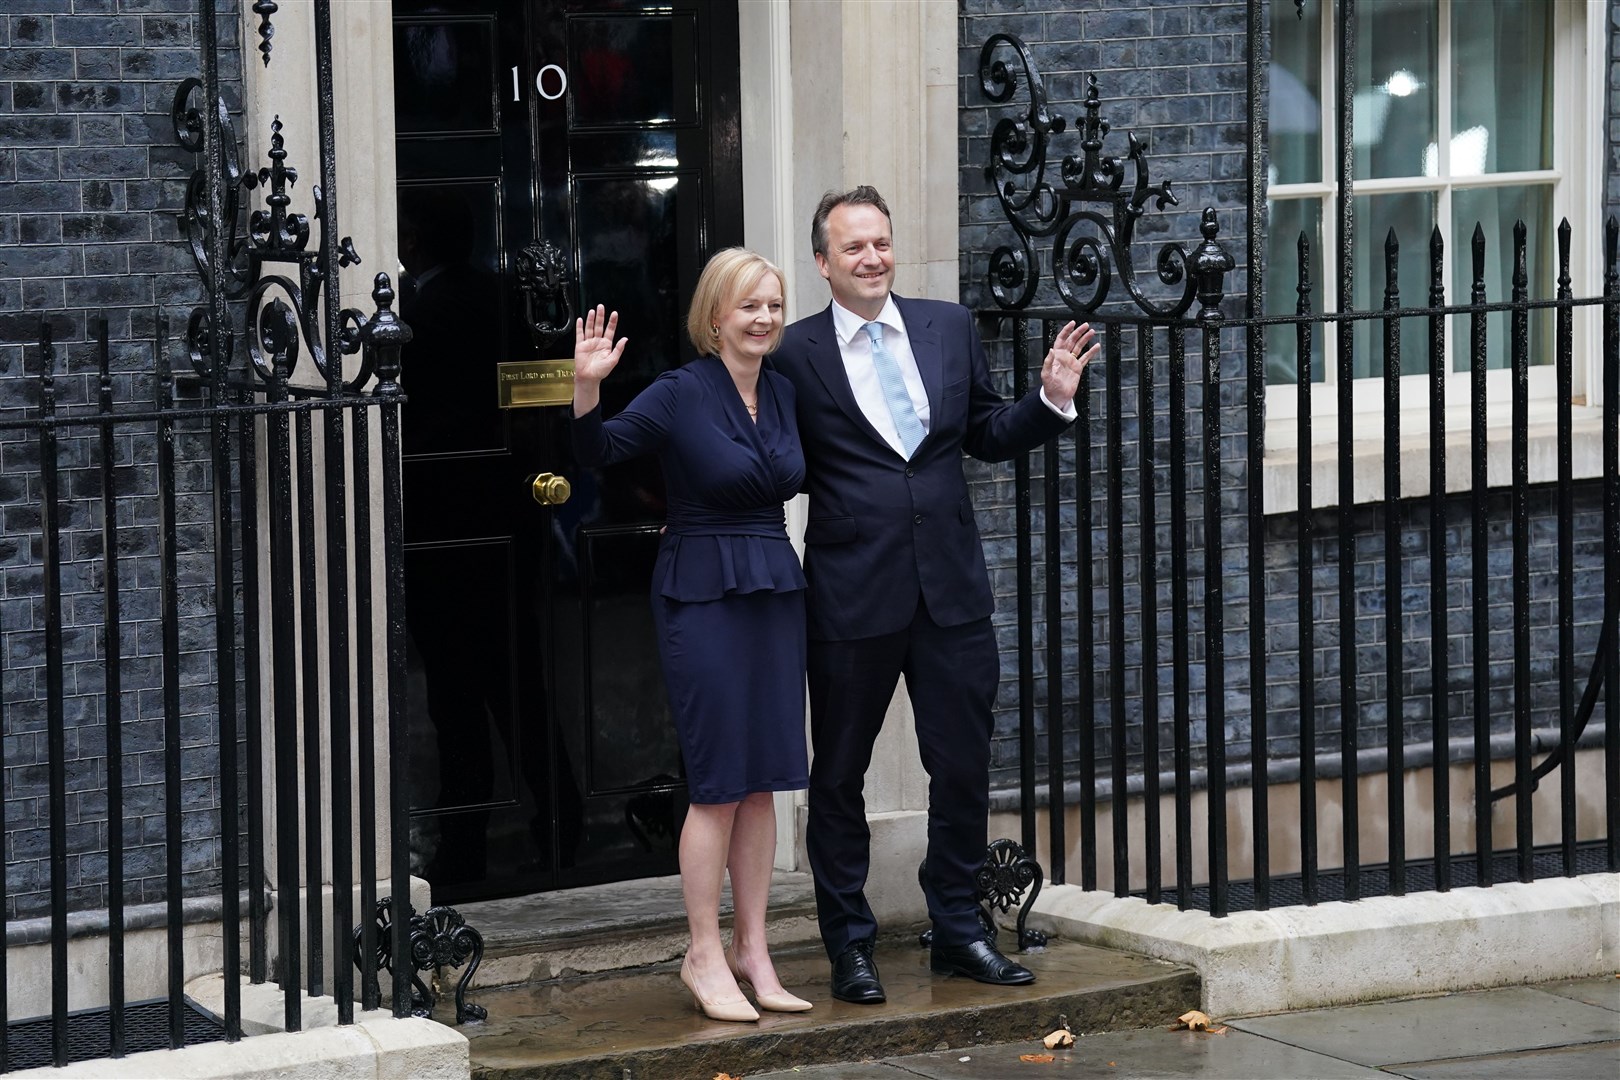 New Prime Minister Liz Truss with her husband Hugh O’Leary after making a speech outside 10 Downing Street (Kirsty O’Connor/PA)